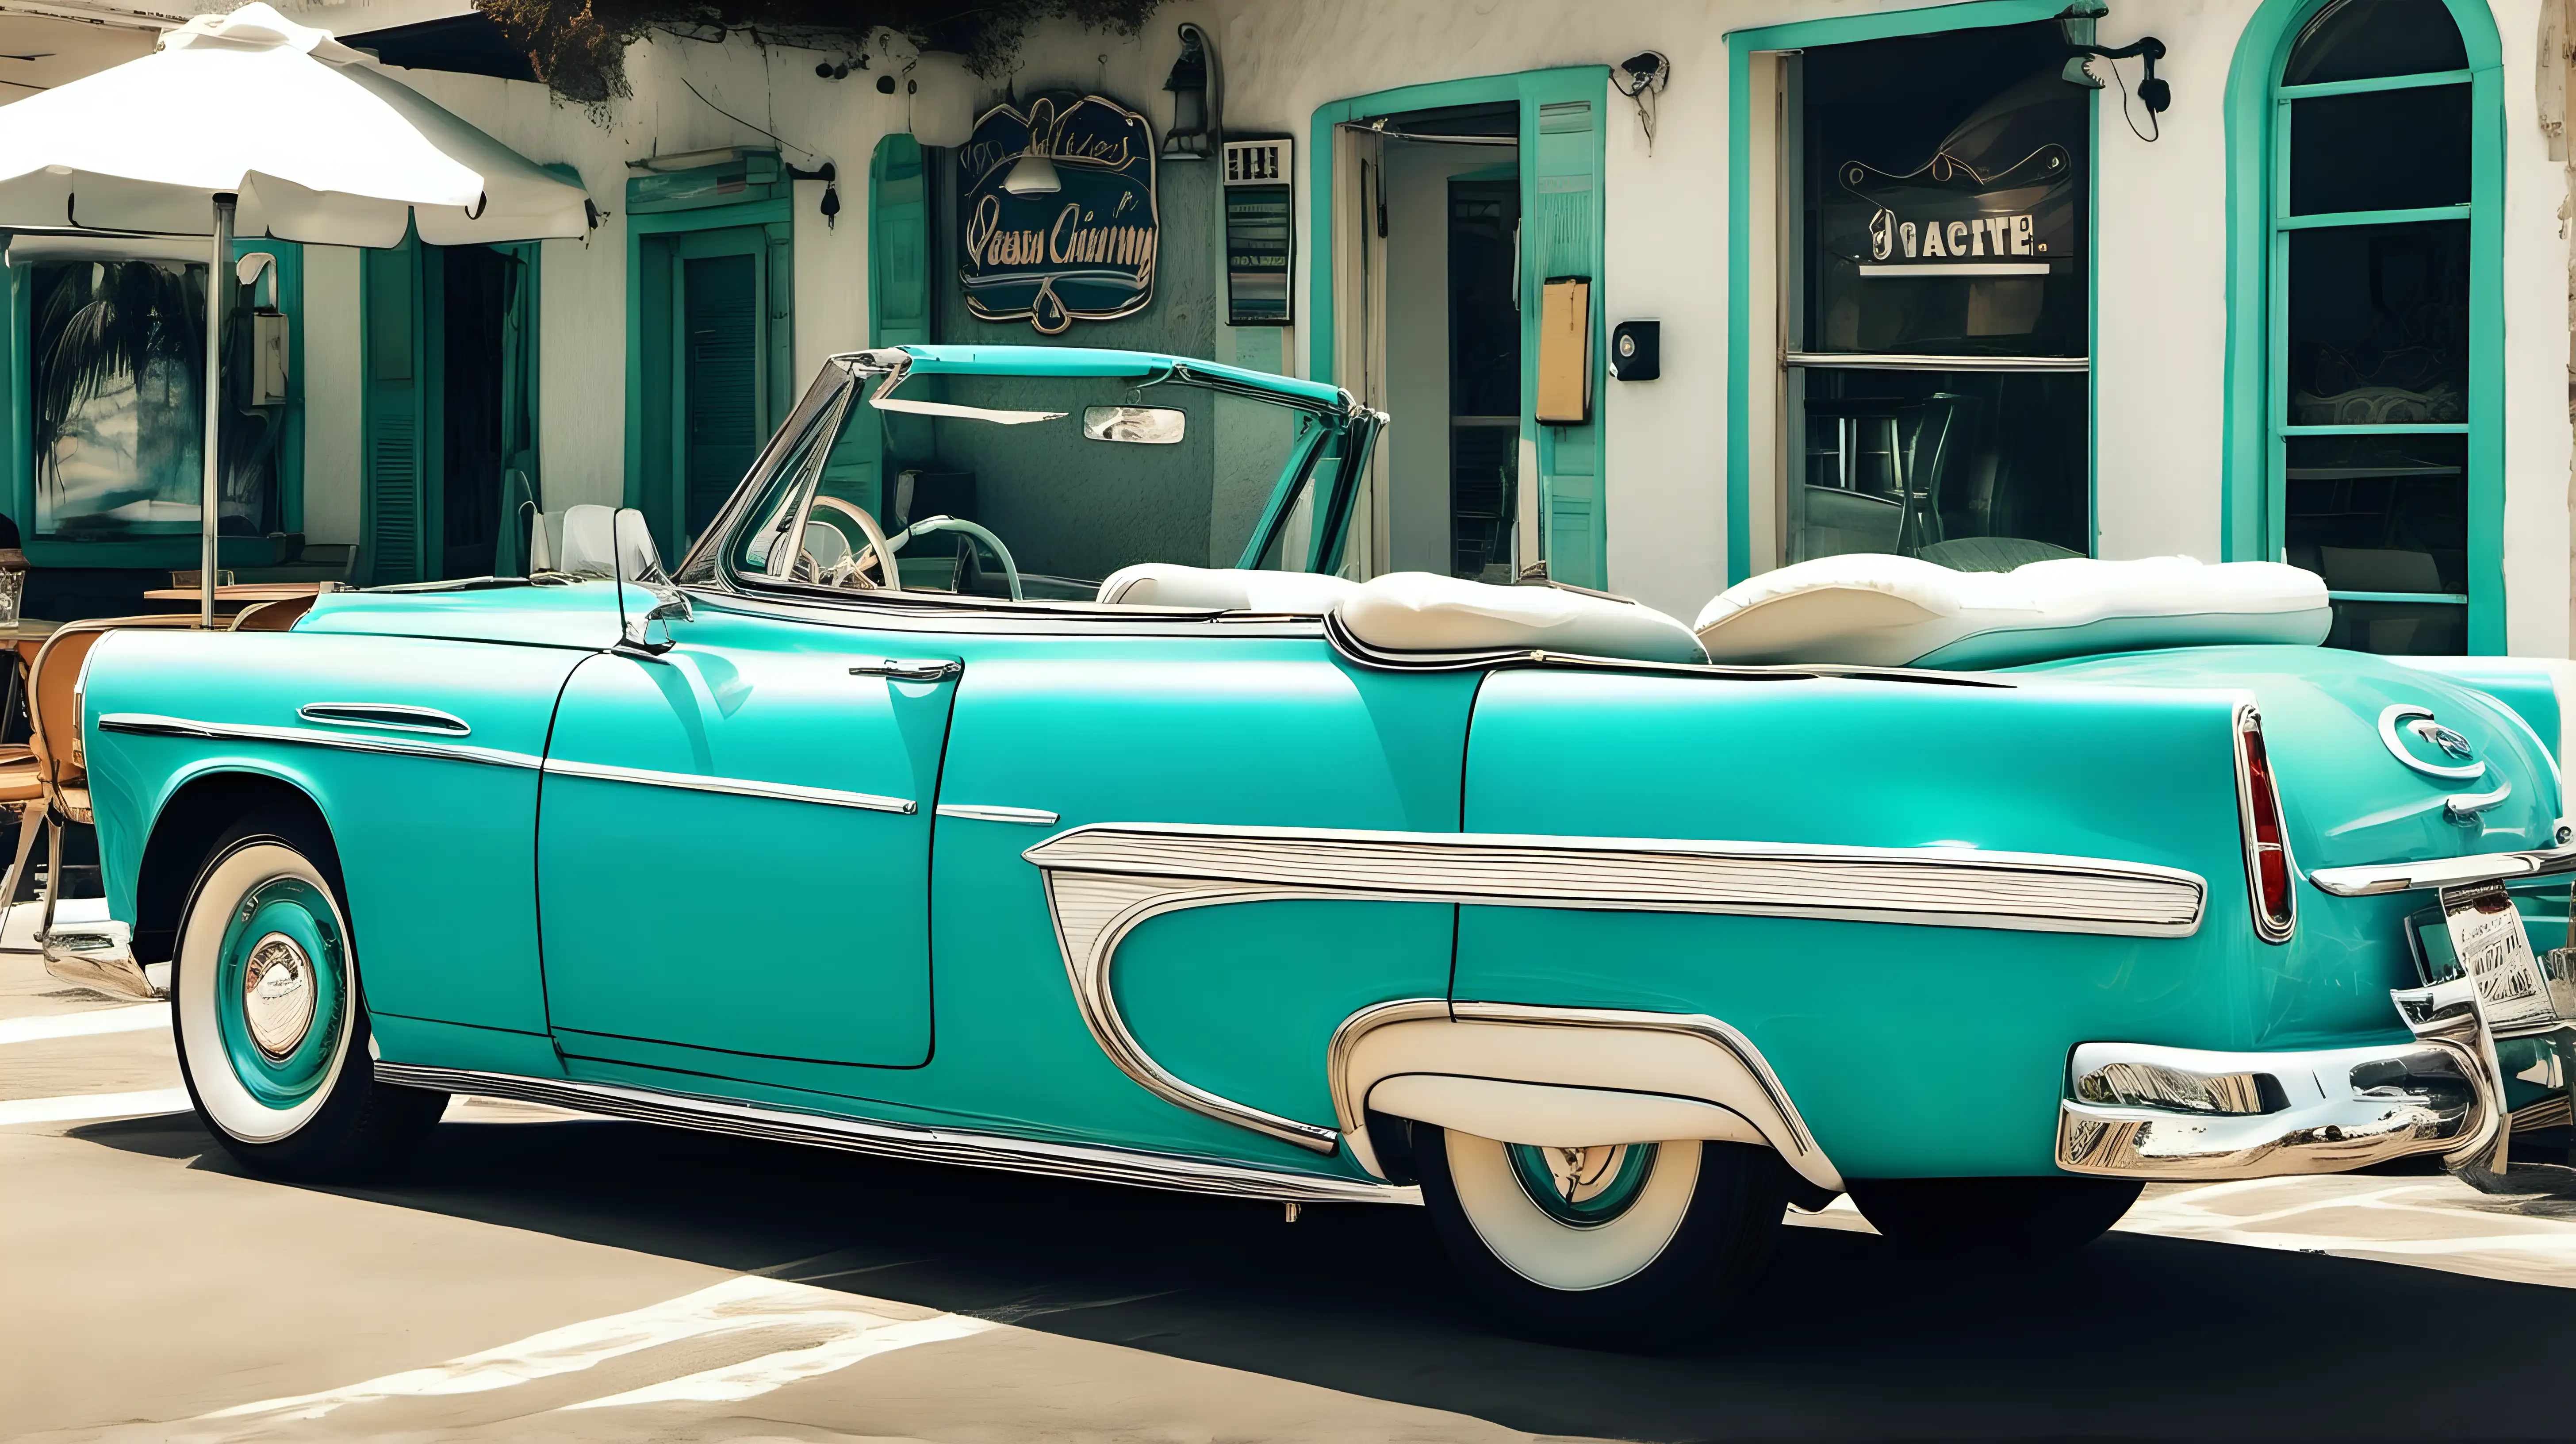 A charming turquoise vintage convertible parked at a seaside café, the ocean breeze tousling its perfectly restored upholstery.